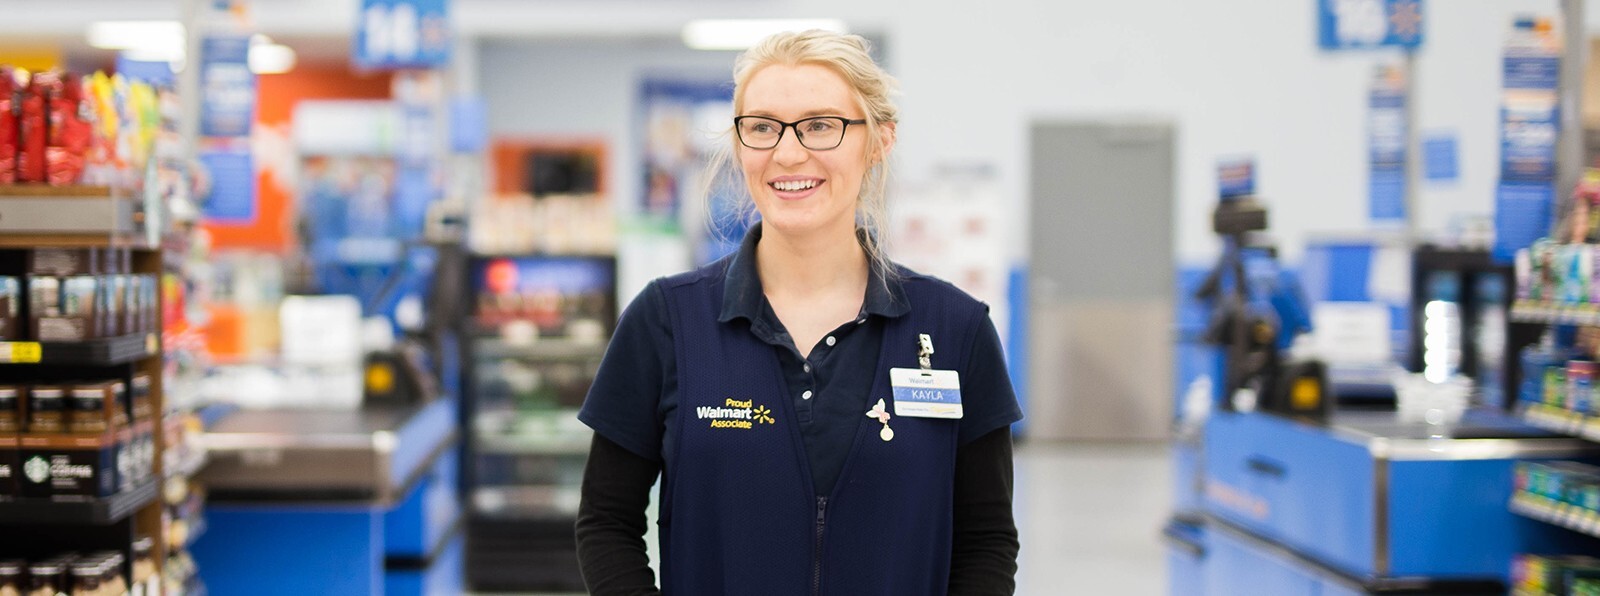 Unlocking Opportunities: Join the Walmart Team Today!